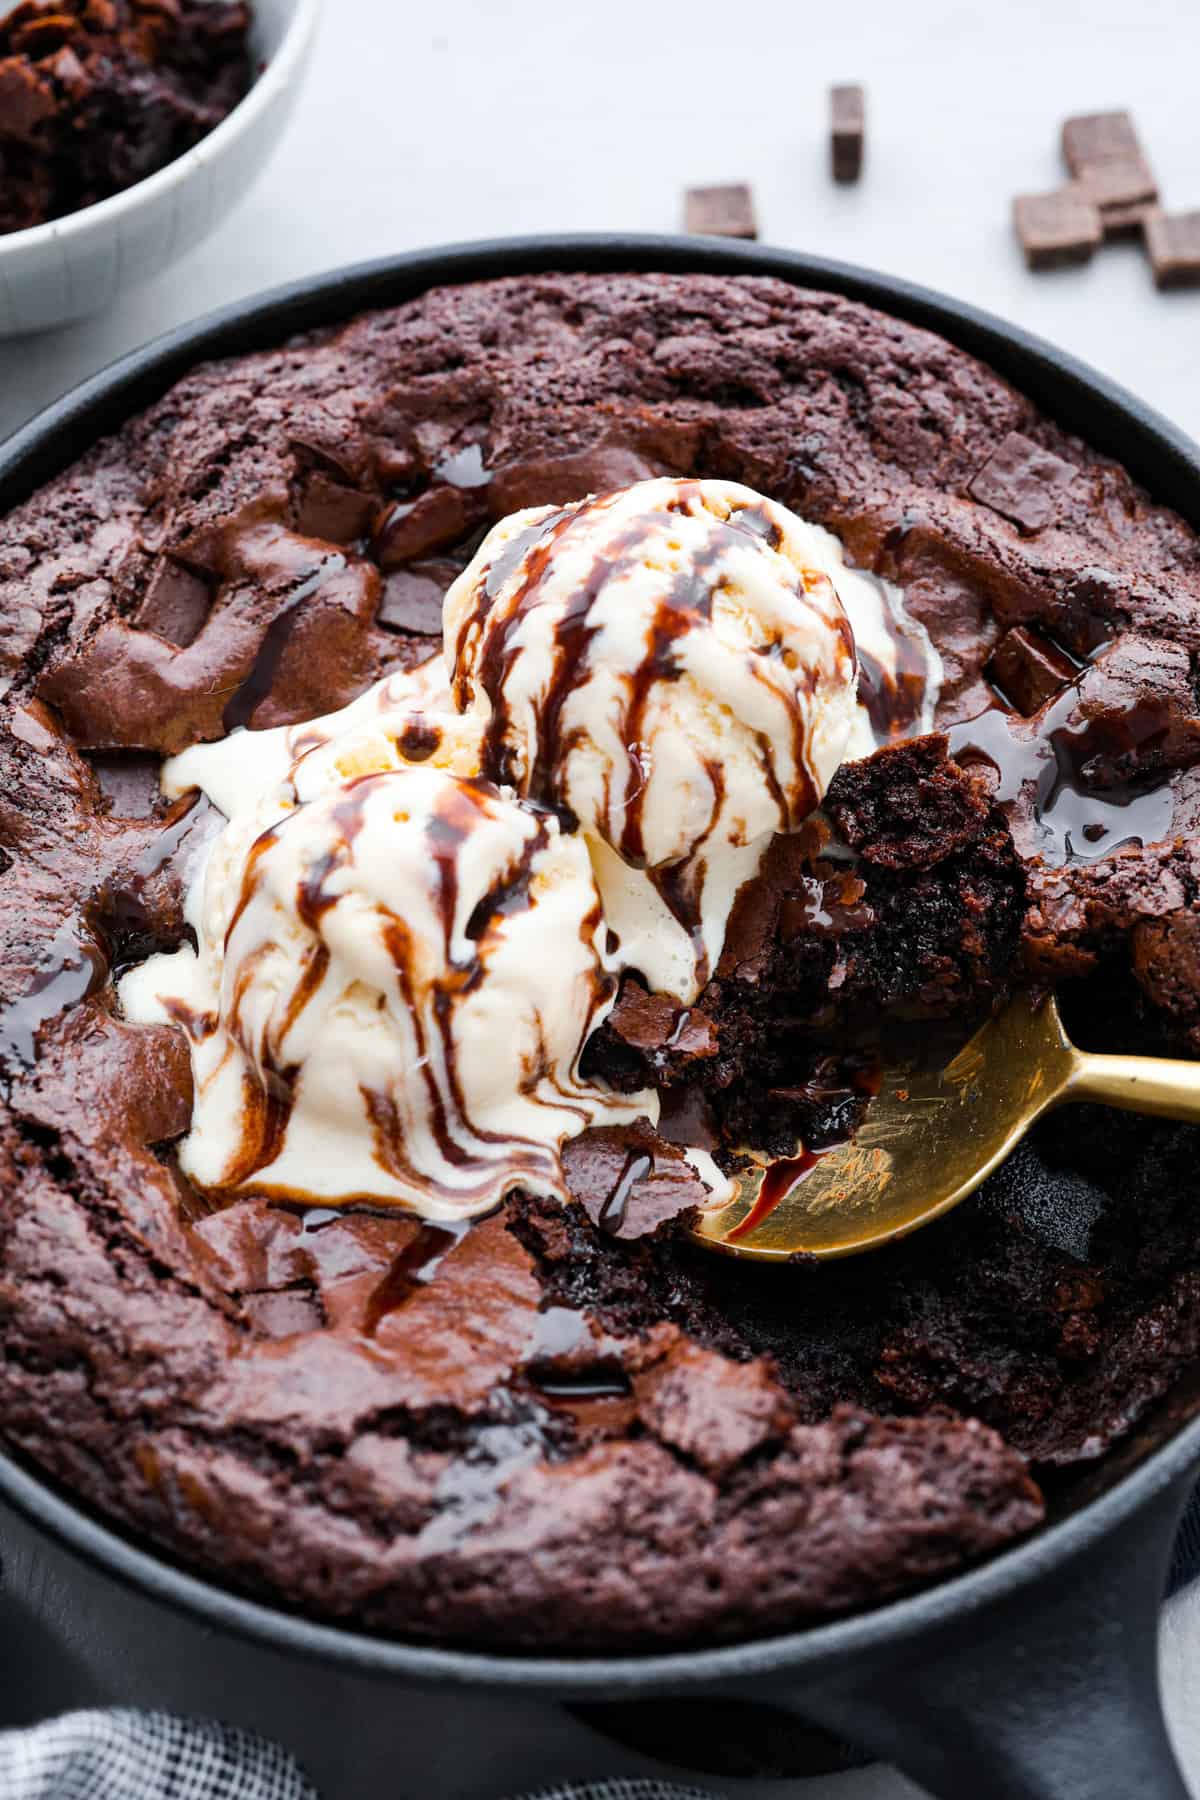 https://therecipecritic.com/wp-content/uploads/2023/01/brownie-skillet-1.jpg